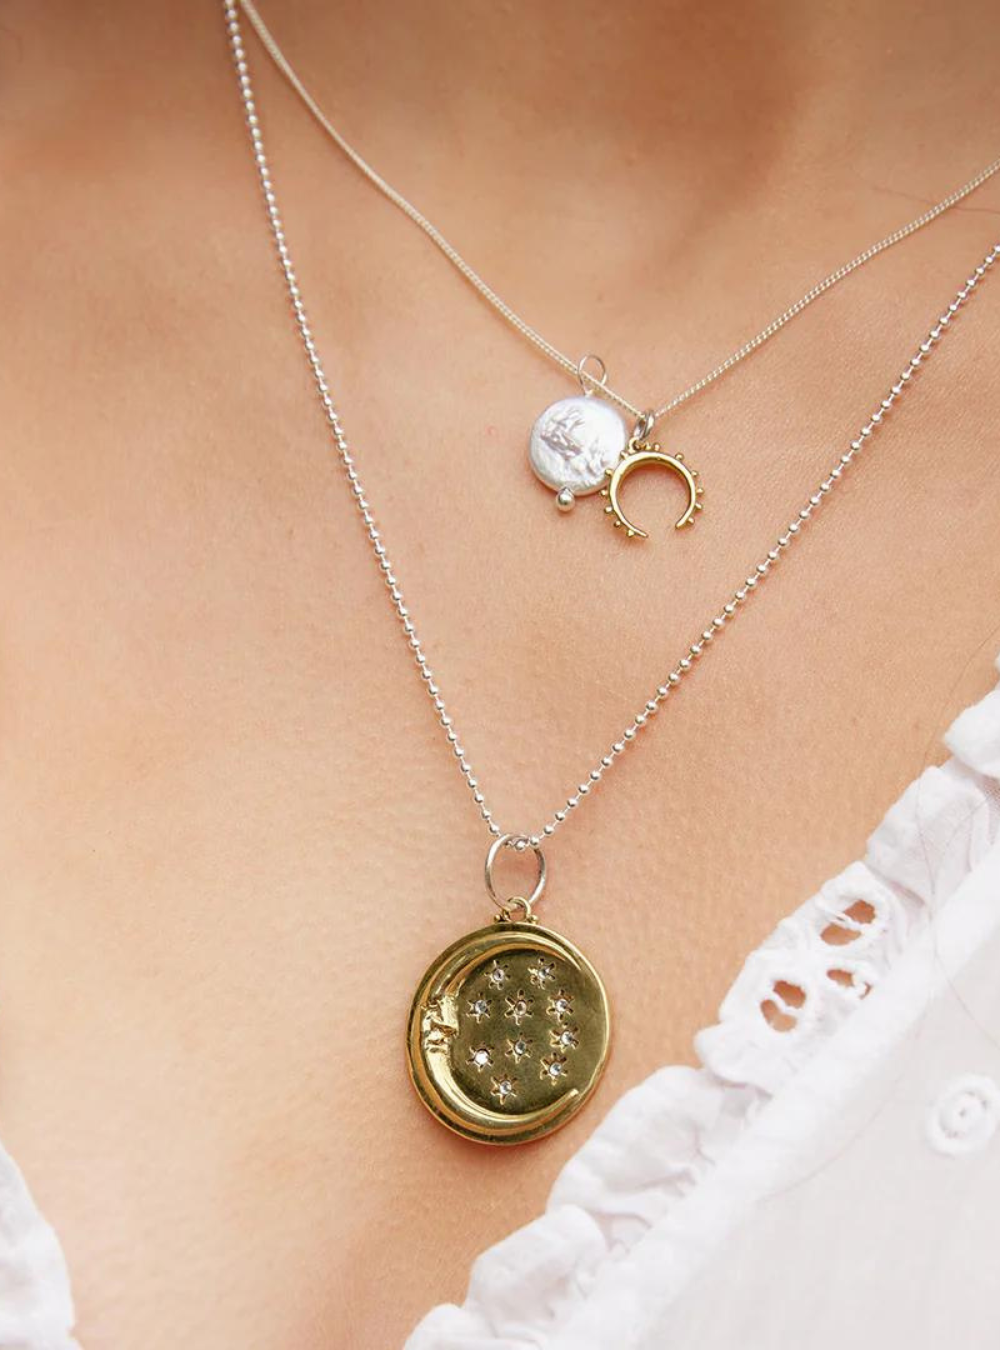 Goddess Moon & Pearl Amulet Necklace